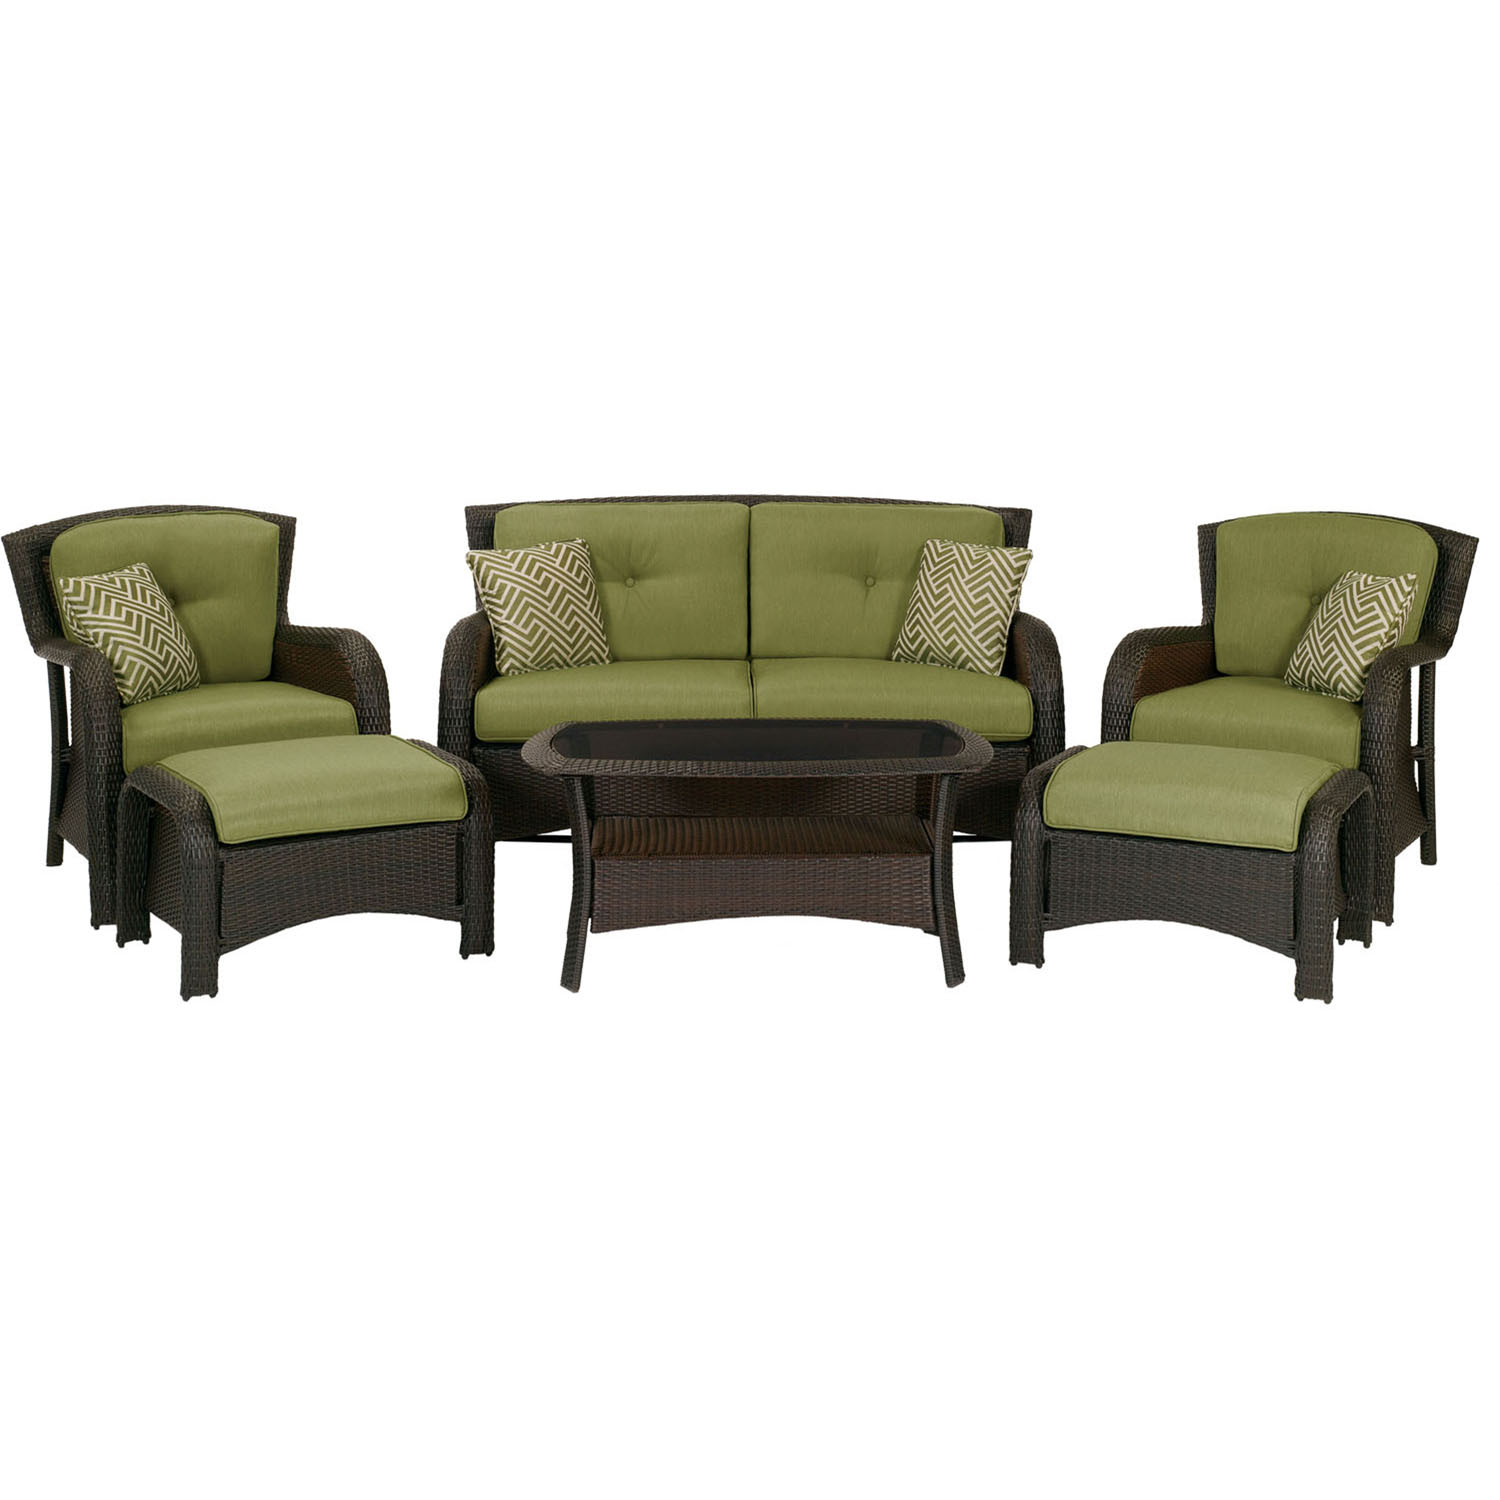 Hanover Strathmere 6-Piece Wicker and Steel Outdoor Conversation Set, Cilantro Green - image 1 of 15